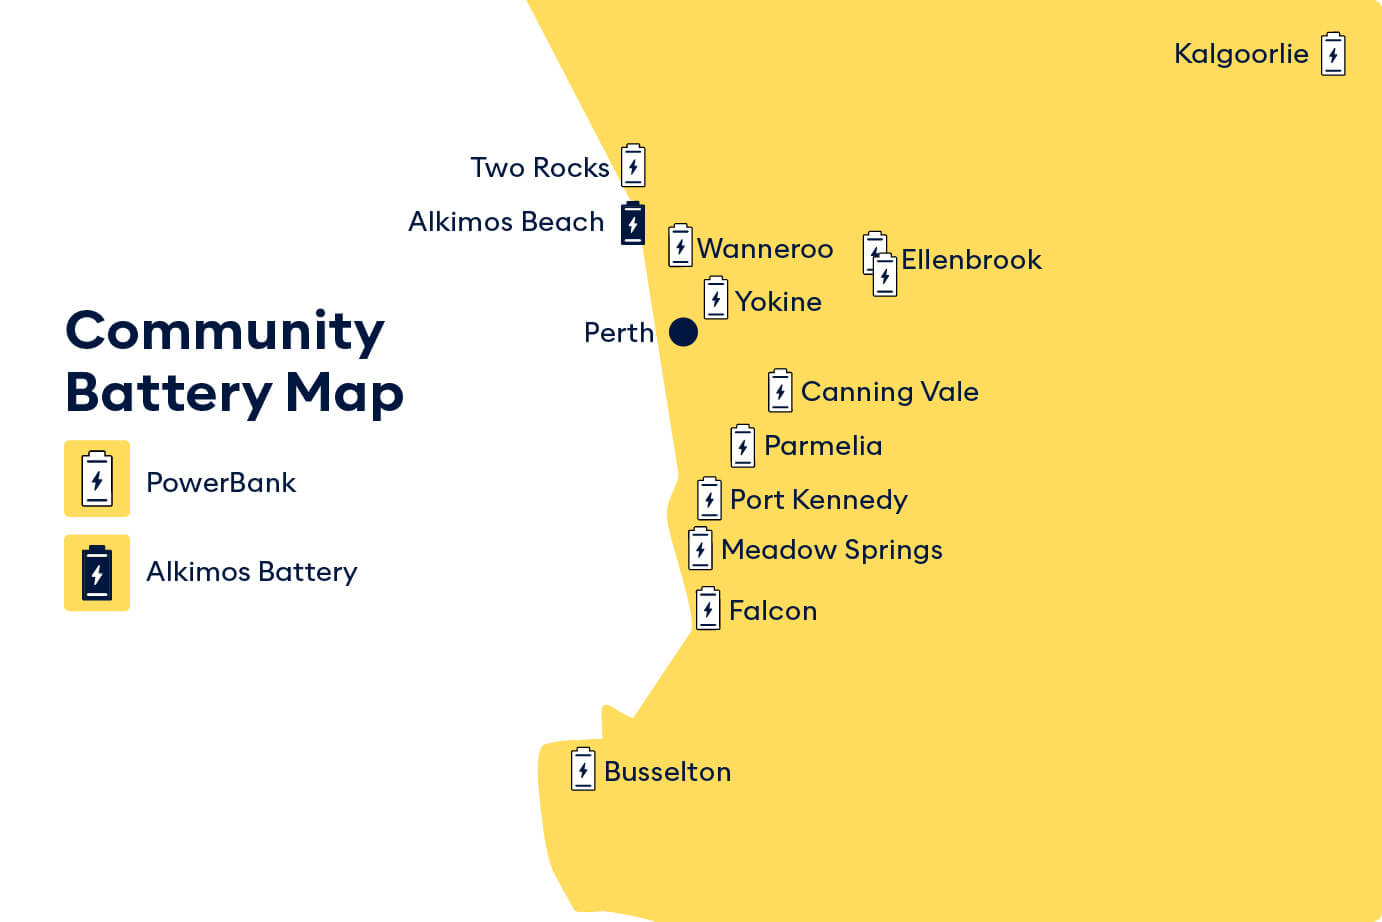 Community Battery Map showing the locations of all the community batteries in Perth, WA